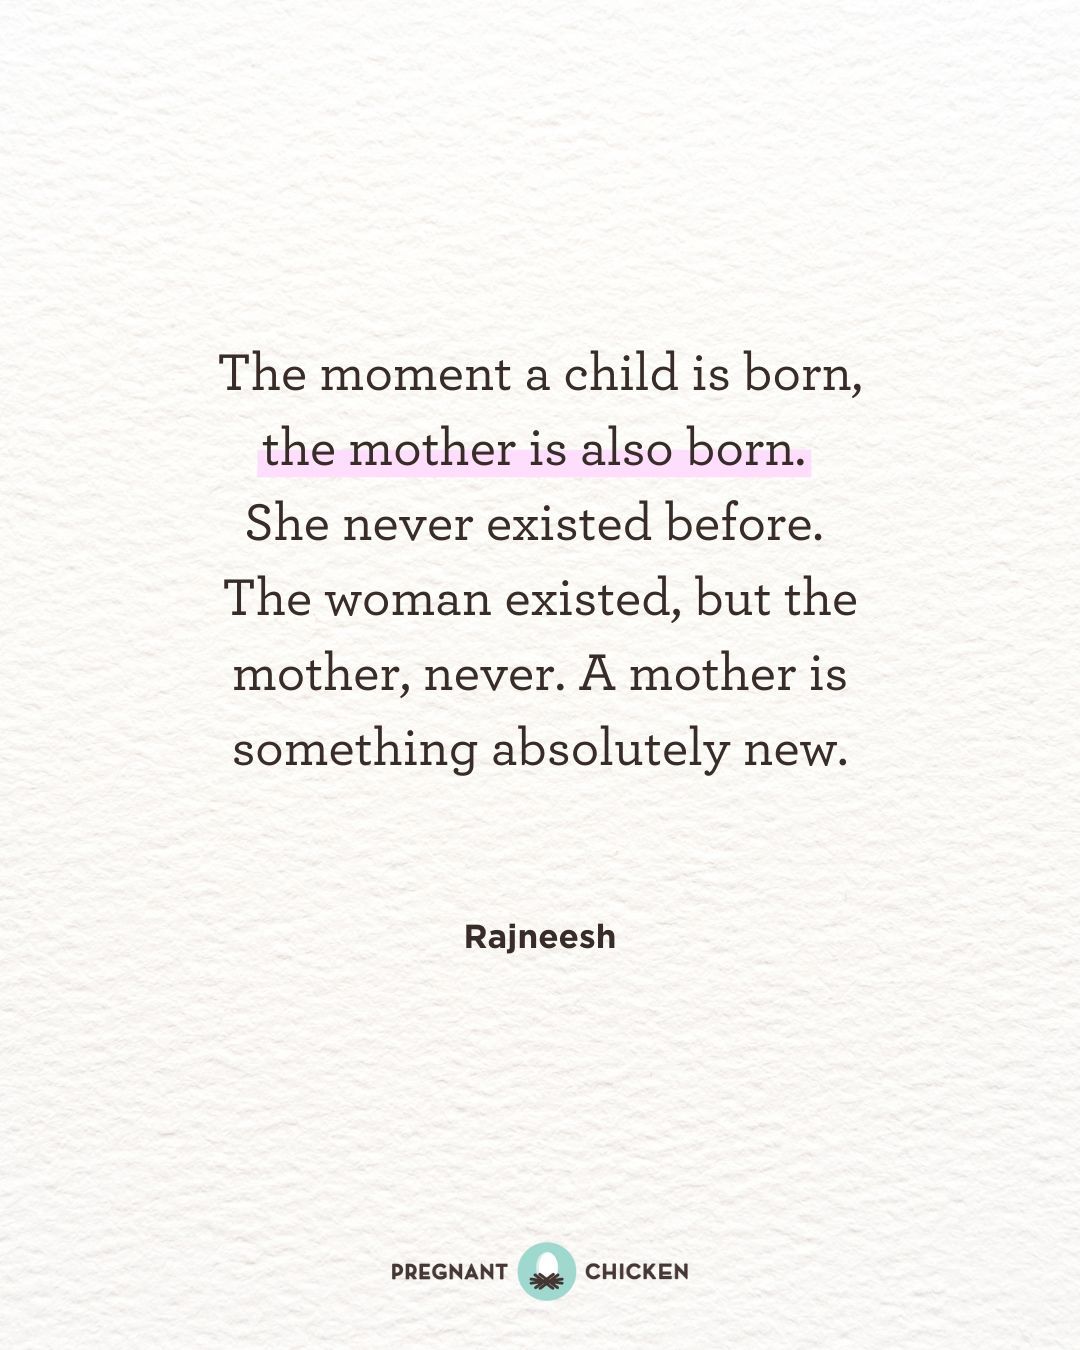 The moment a child is born, the mother is also born.  She never existed before.  The woman existed, but the mother, never. A mother is something absolutely new.